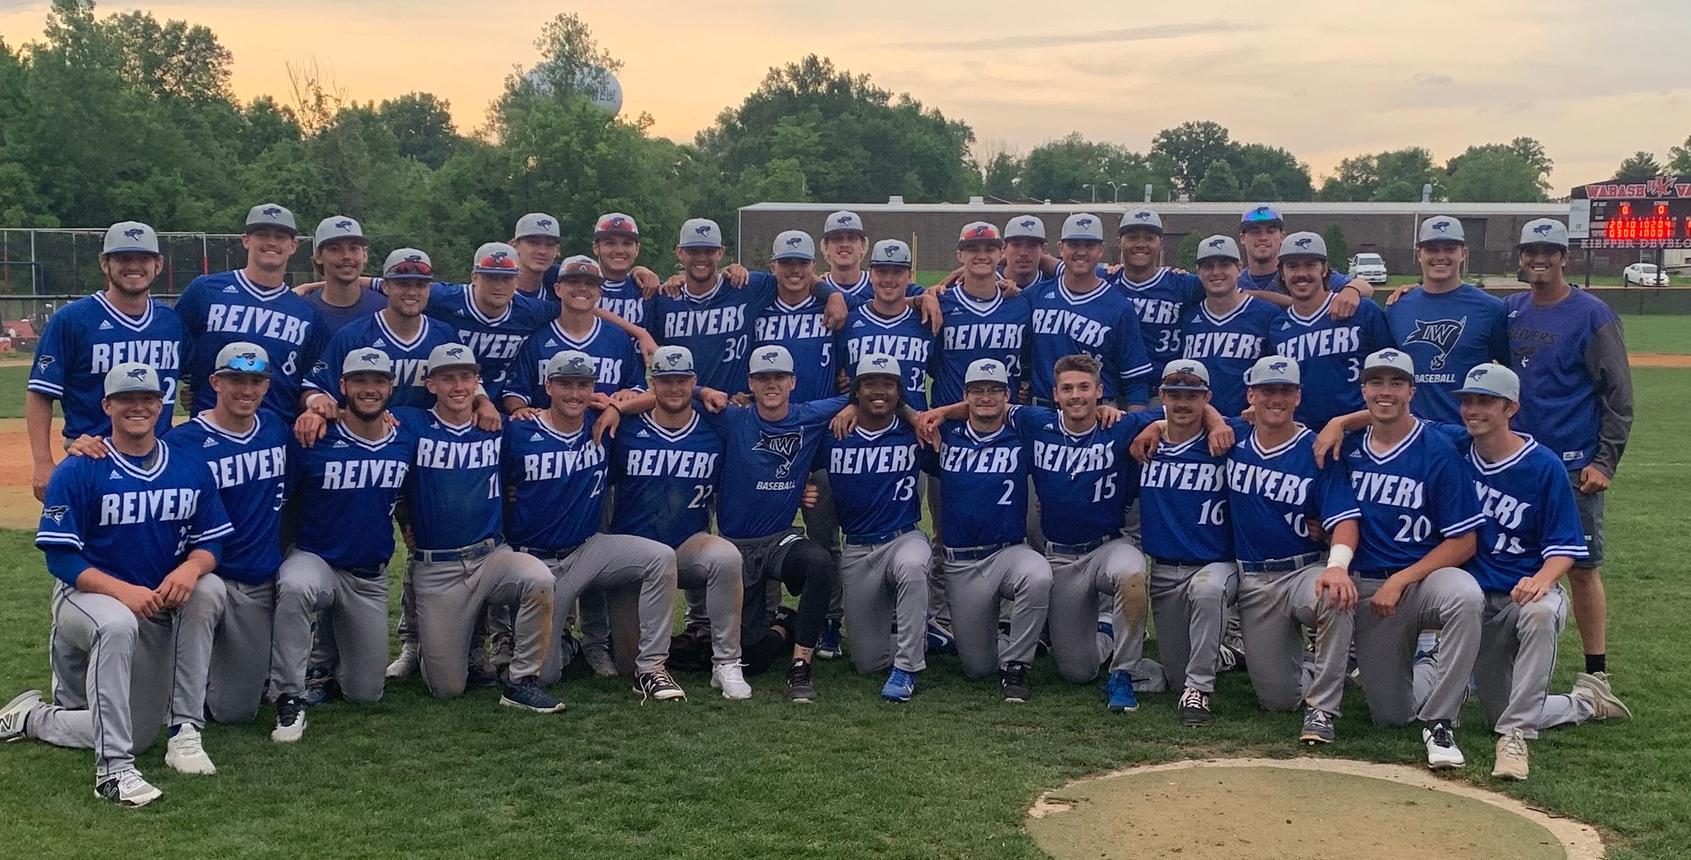 Reivers Top #1 Wabash Valley, Earn 19th Trip to JUCO World Series